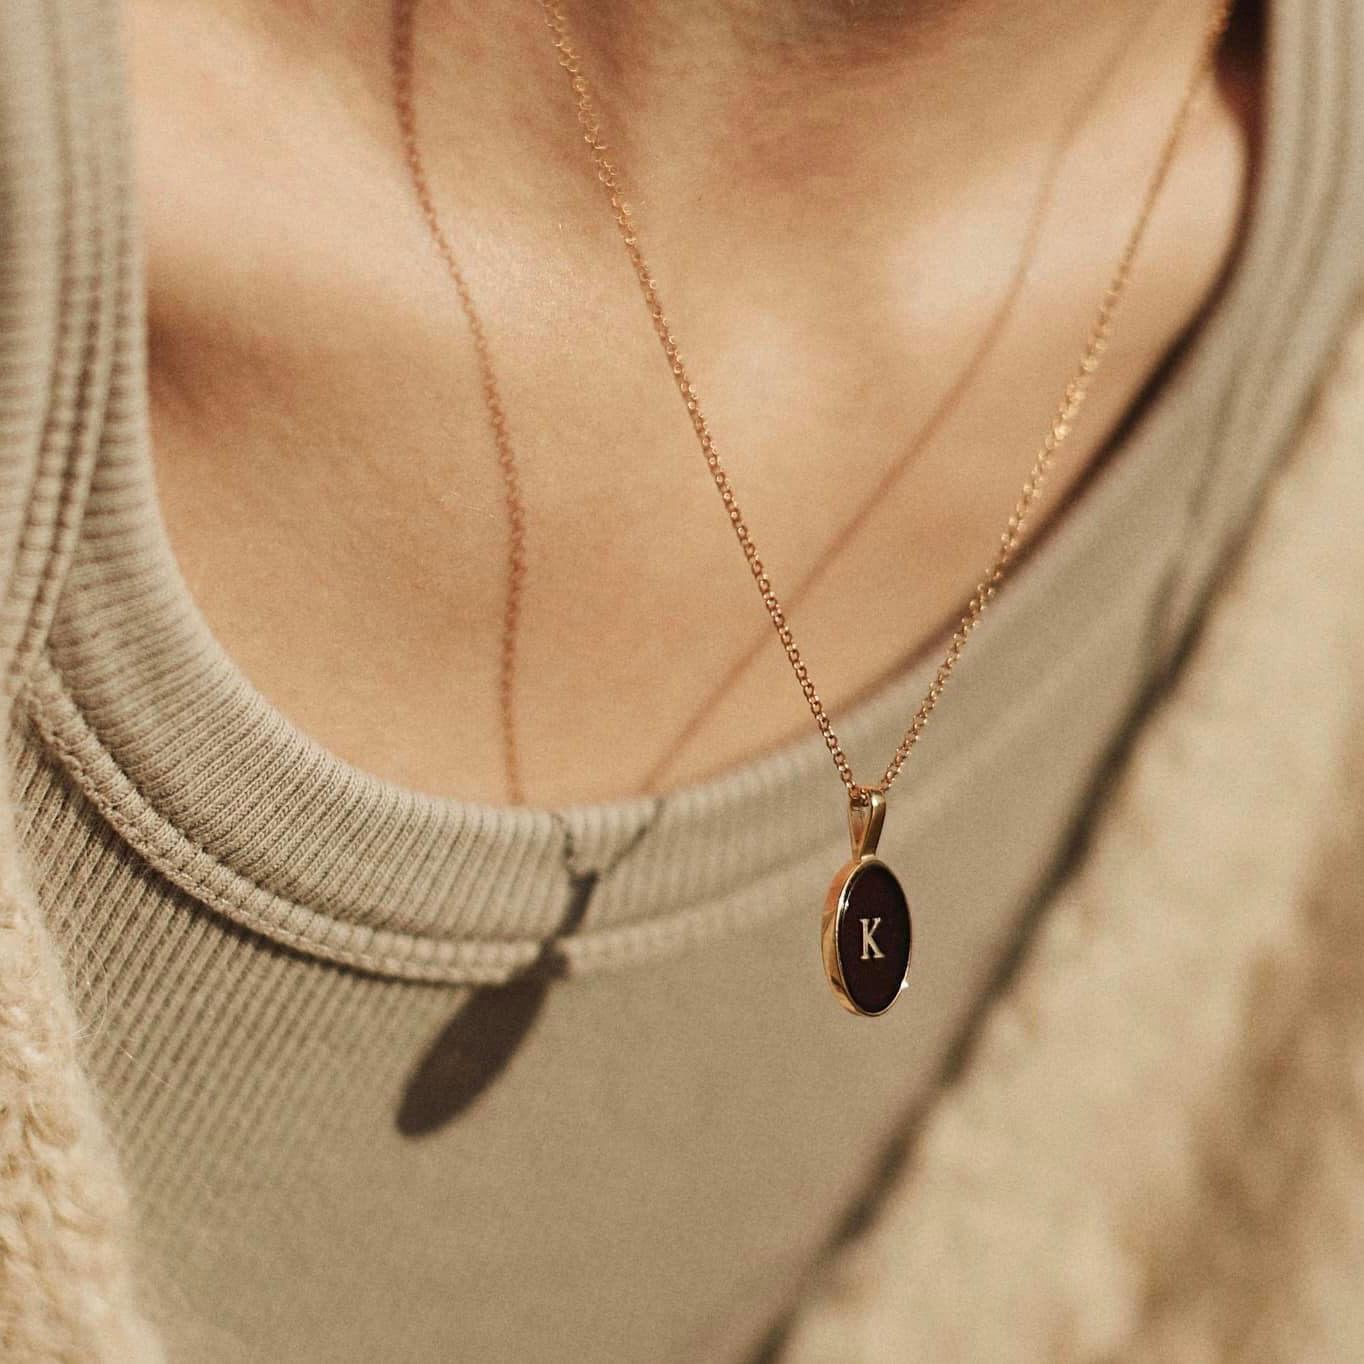 Baltic amber has been famous for its properties for centuries - it promotes health and happiness. Initials express the powers of the names. Our medallions are the perfect combination. They are amulets manifesting the strength of your personality or